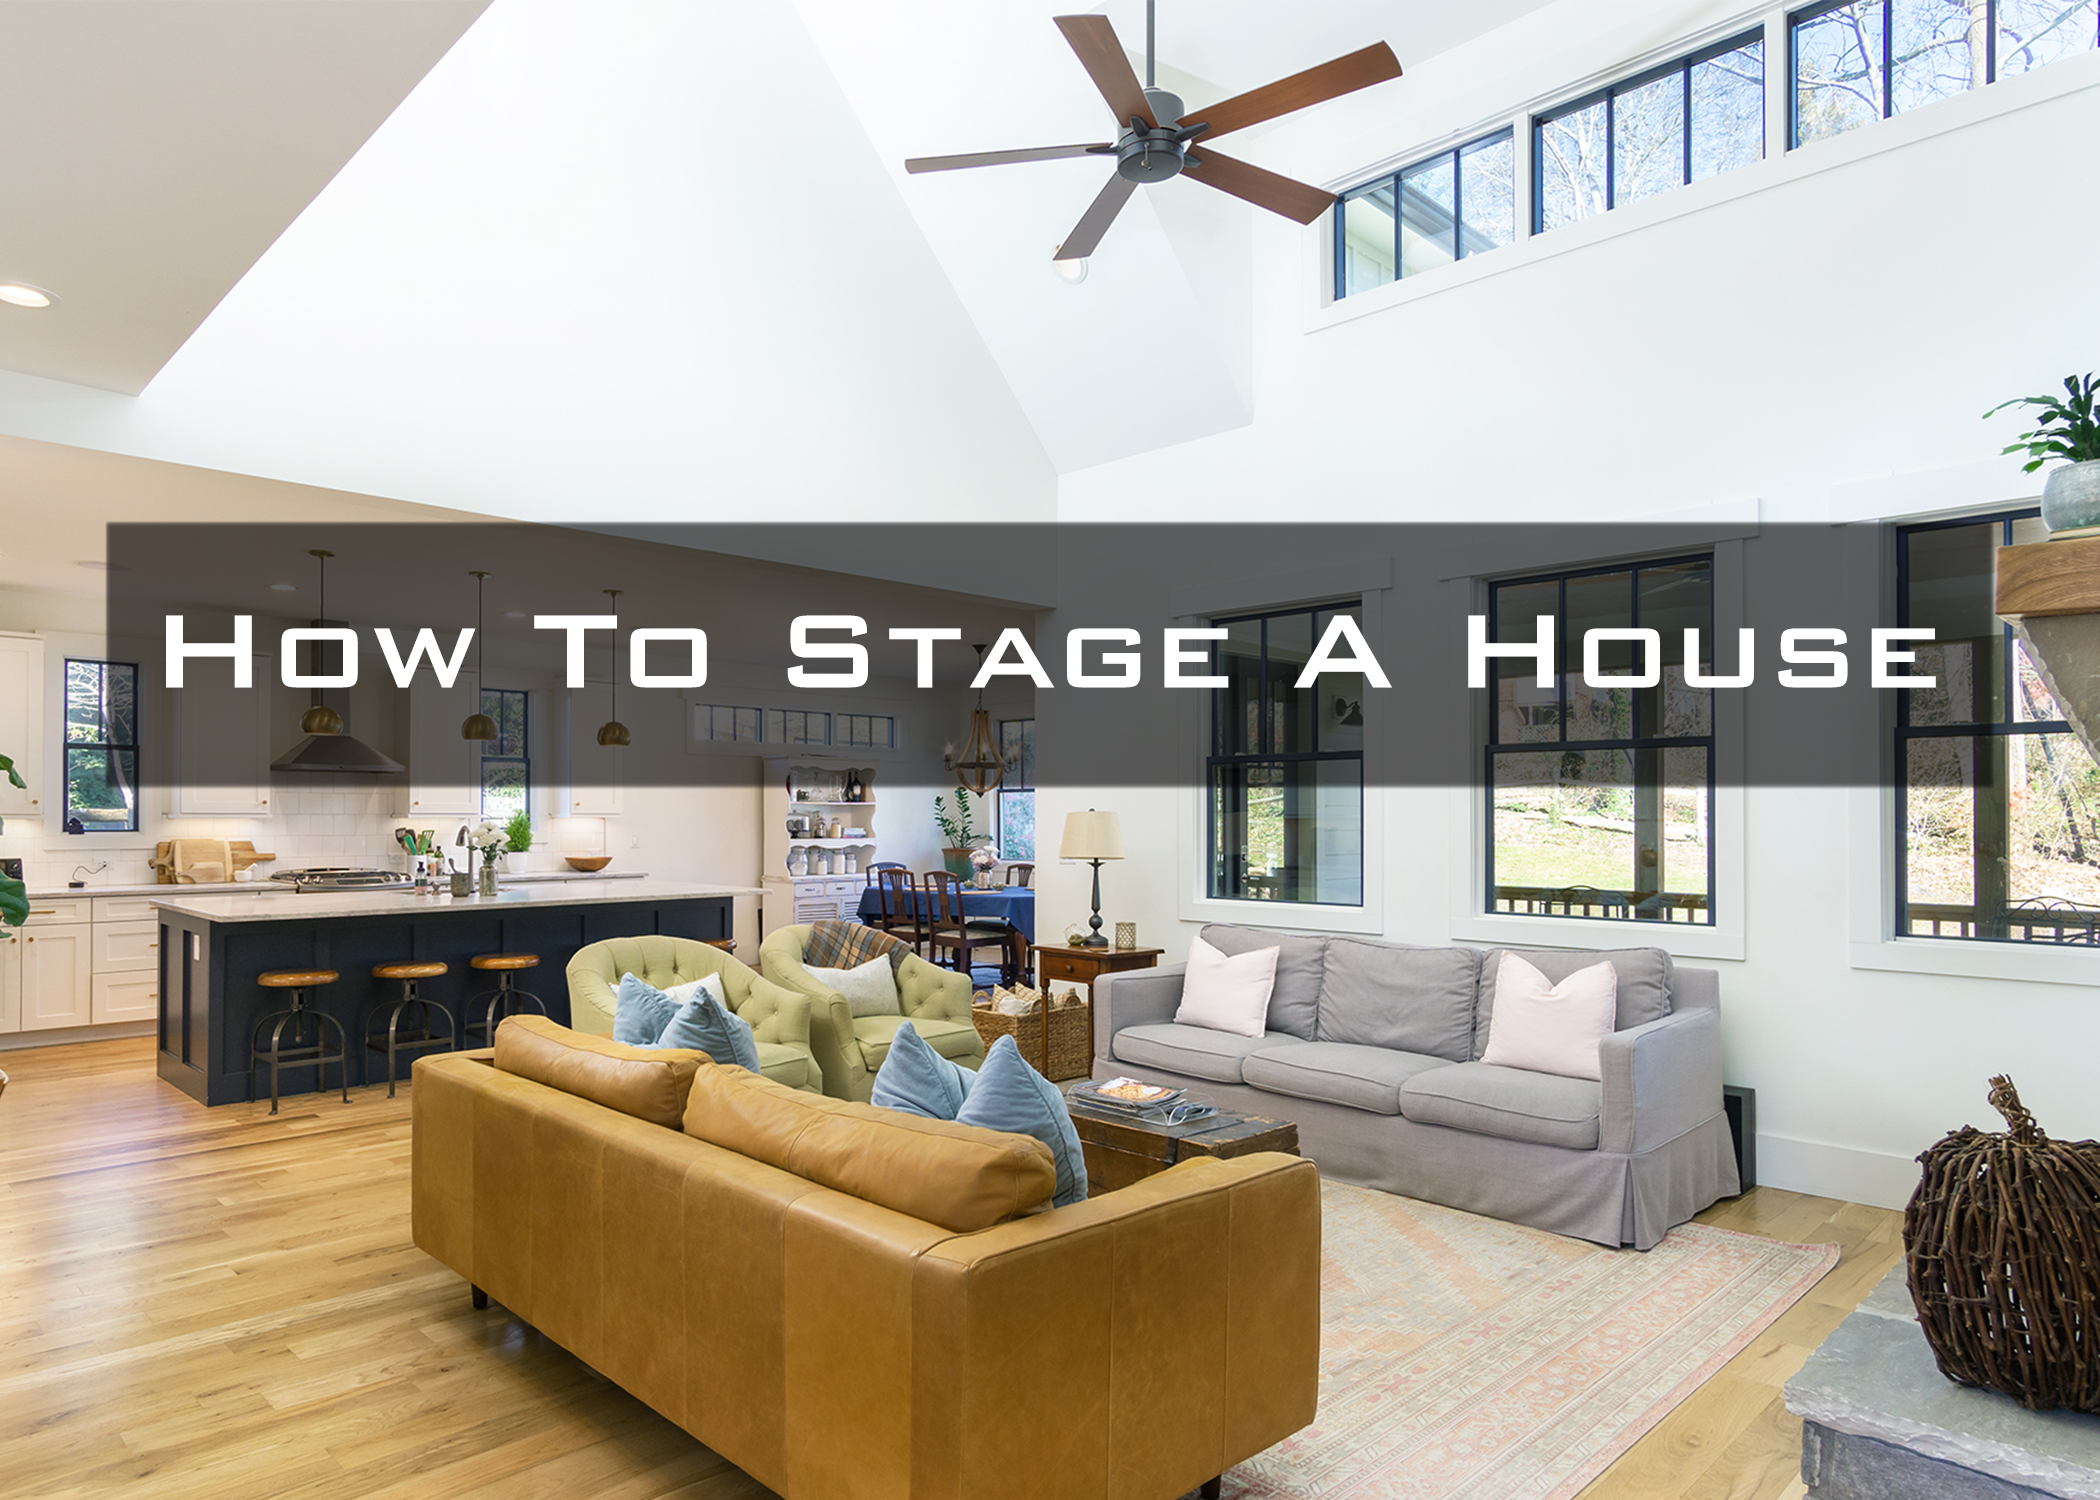 A living room with "How to Stage a House" overlaying the image